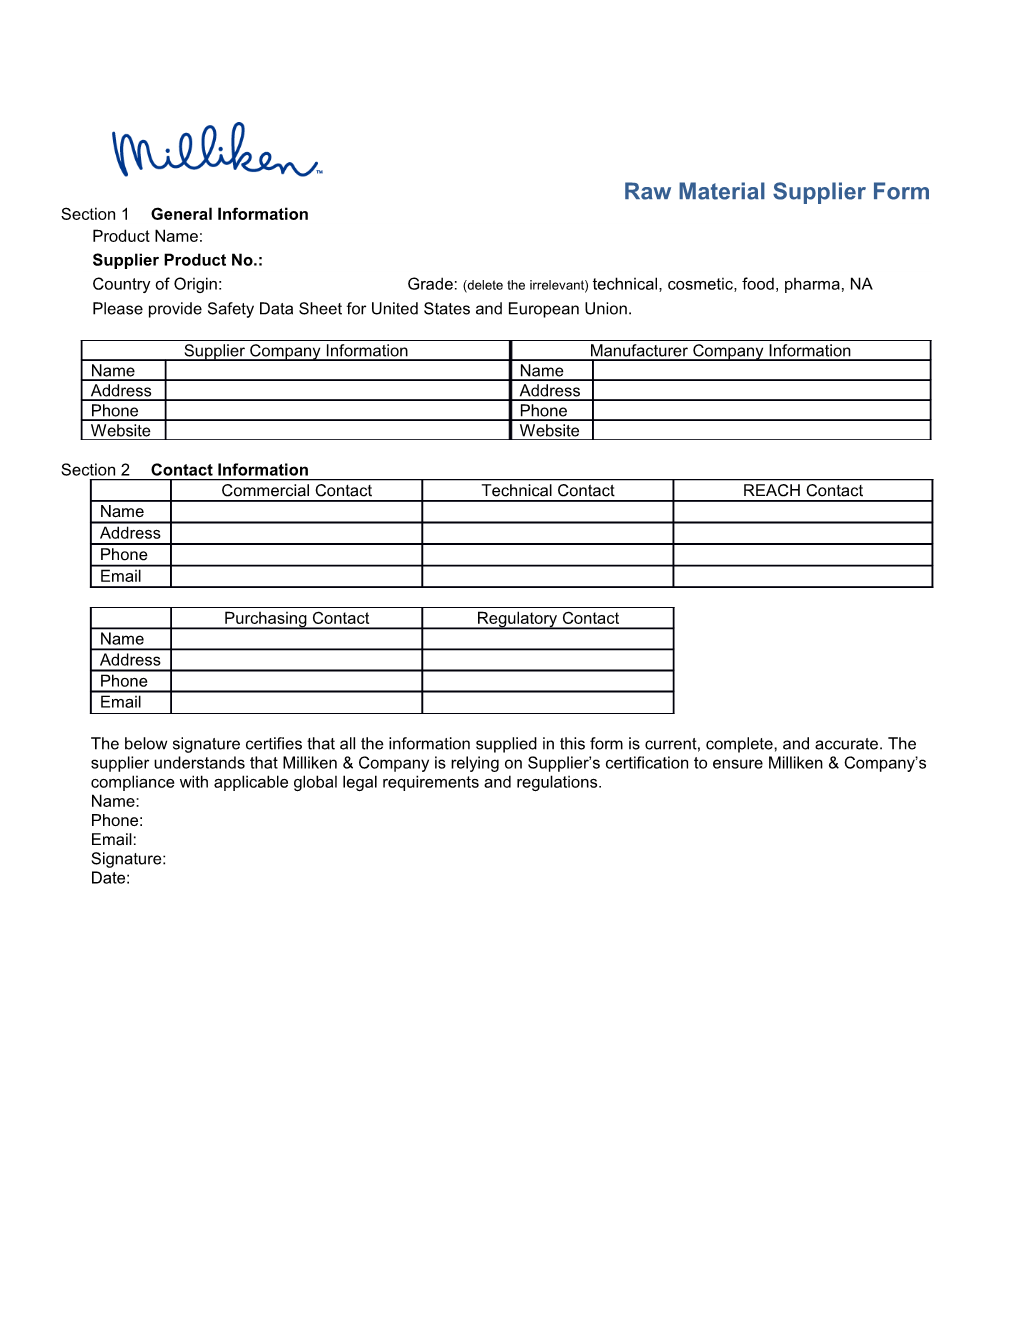 Raw Material Supplier Form